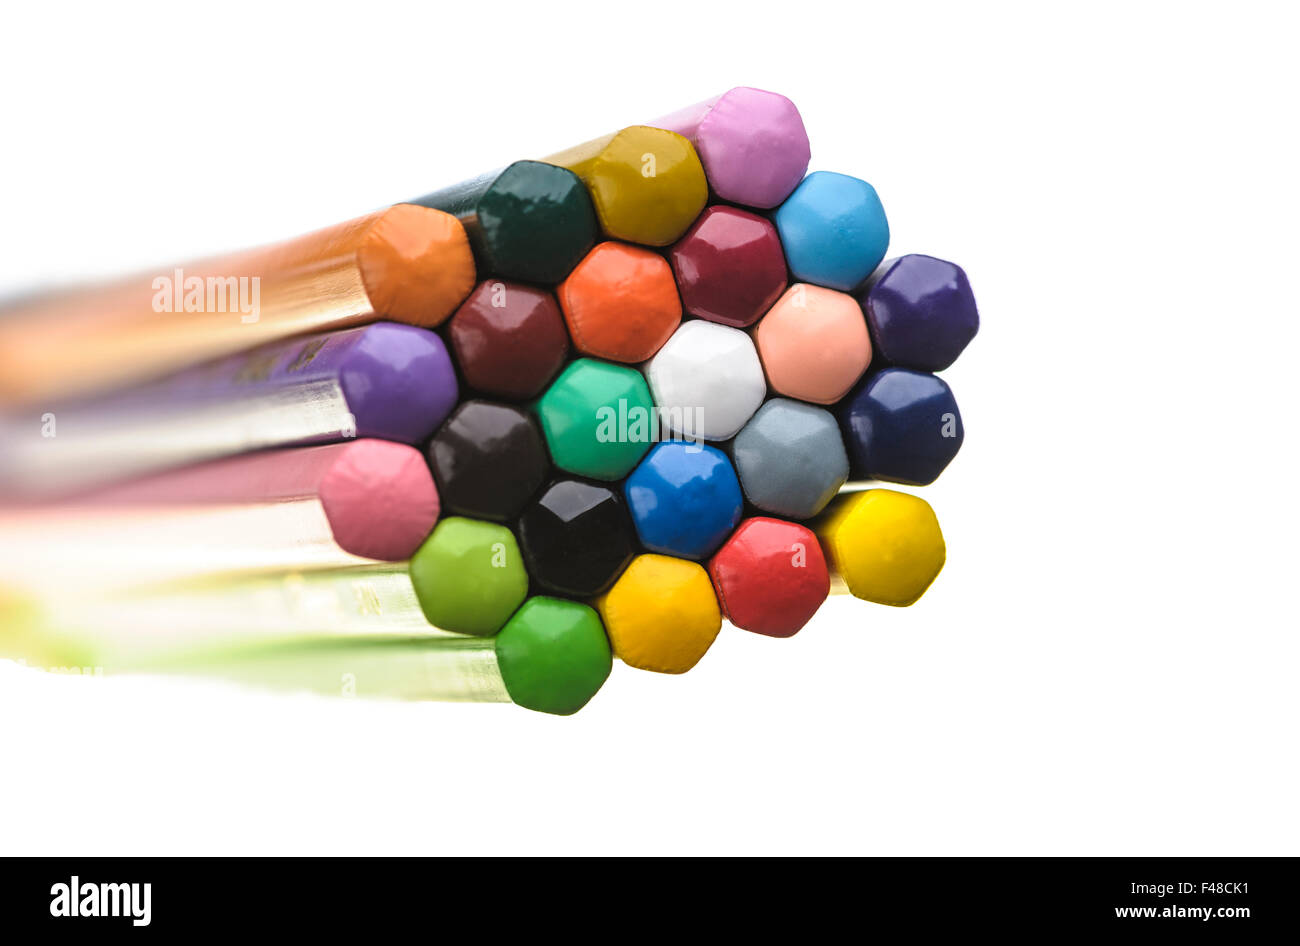 The ends of a group of coloured pencils arranged in a honeycomb pattern. Stock Photo